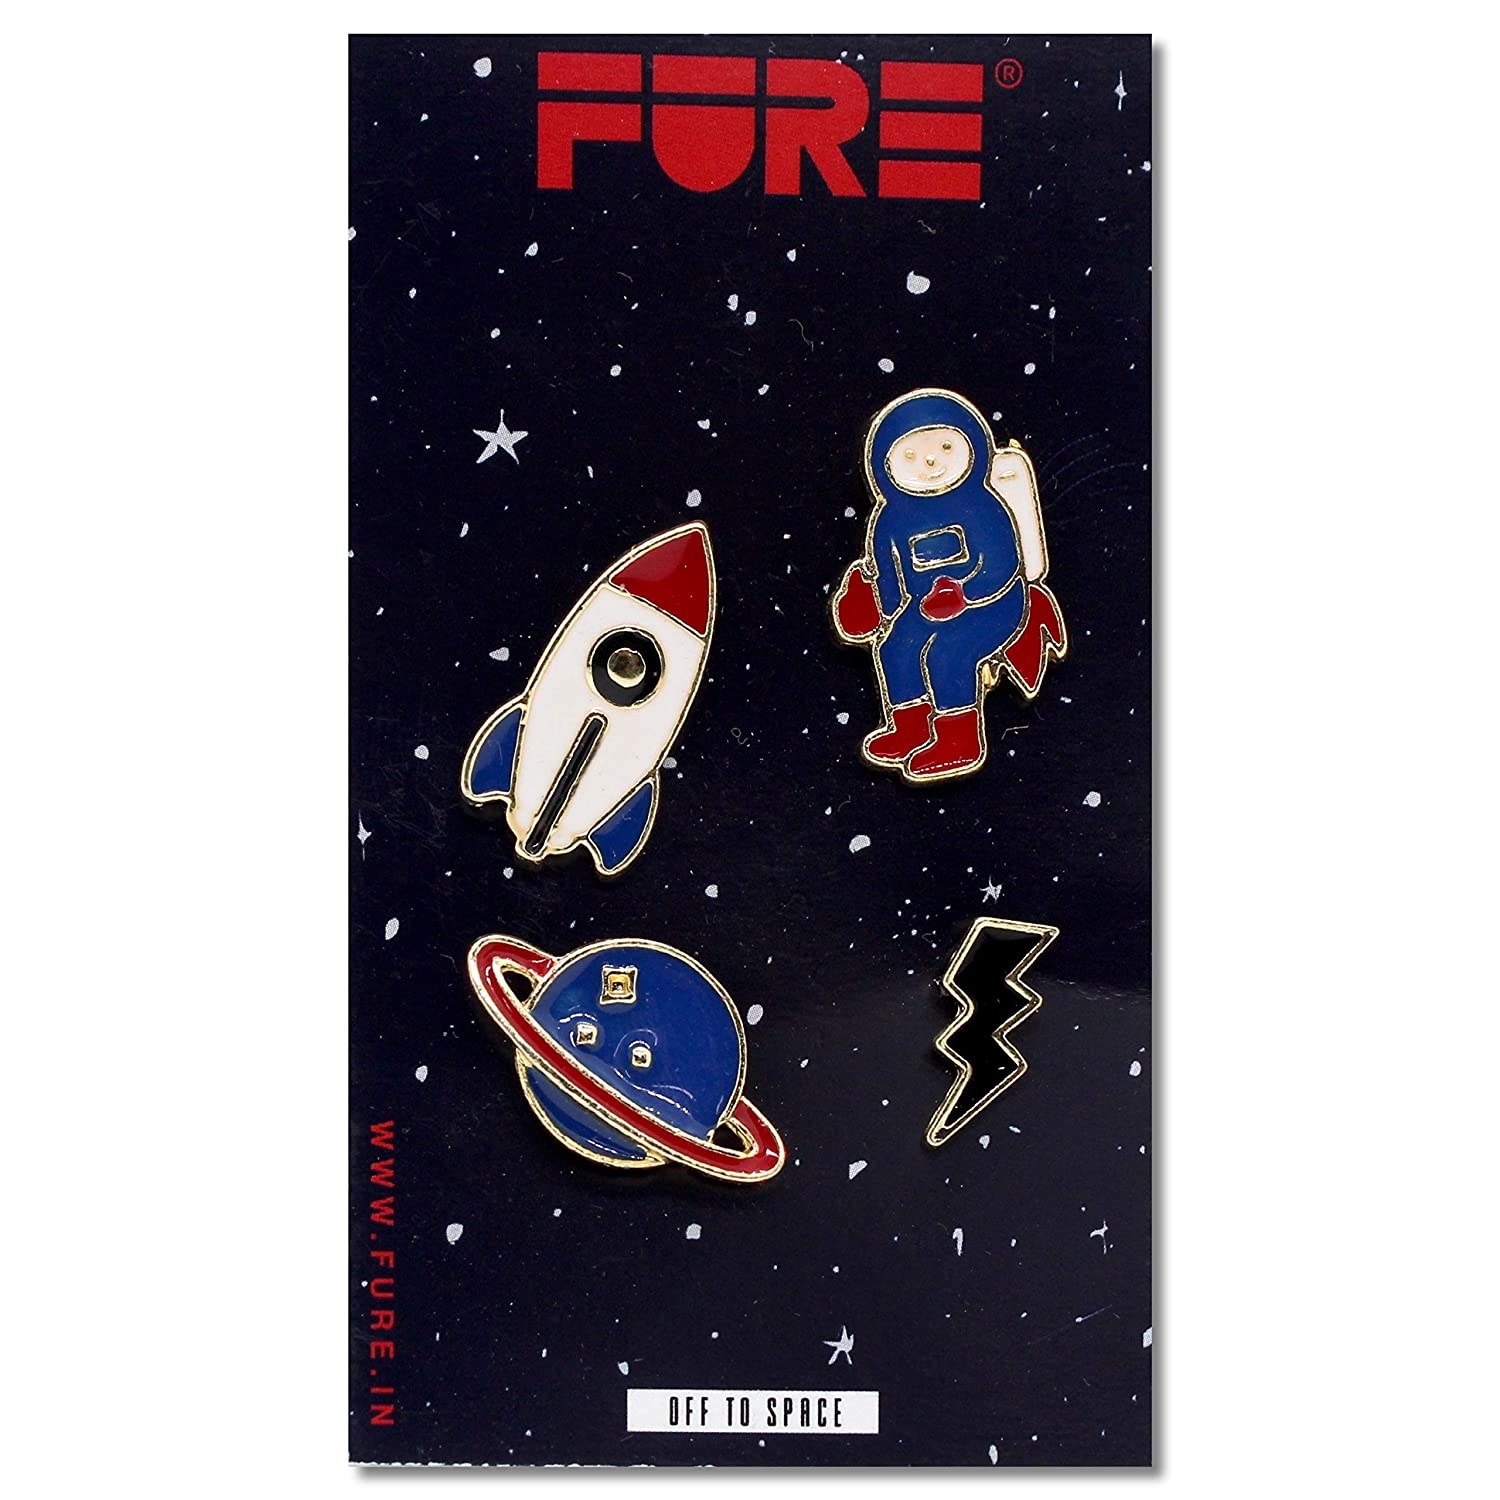 An assortment of space-themed pins which includes a rocket, an astronaut, a planet with a ring around it and a lighting bolt.